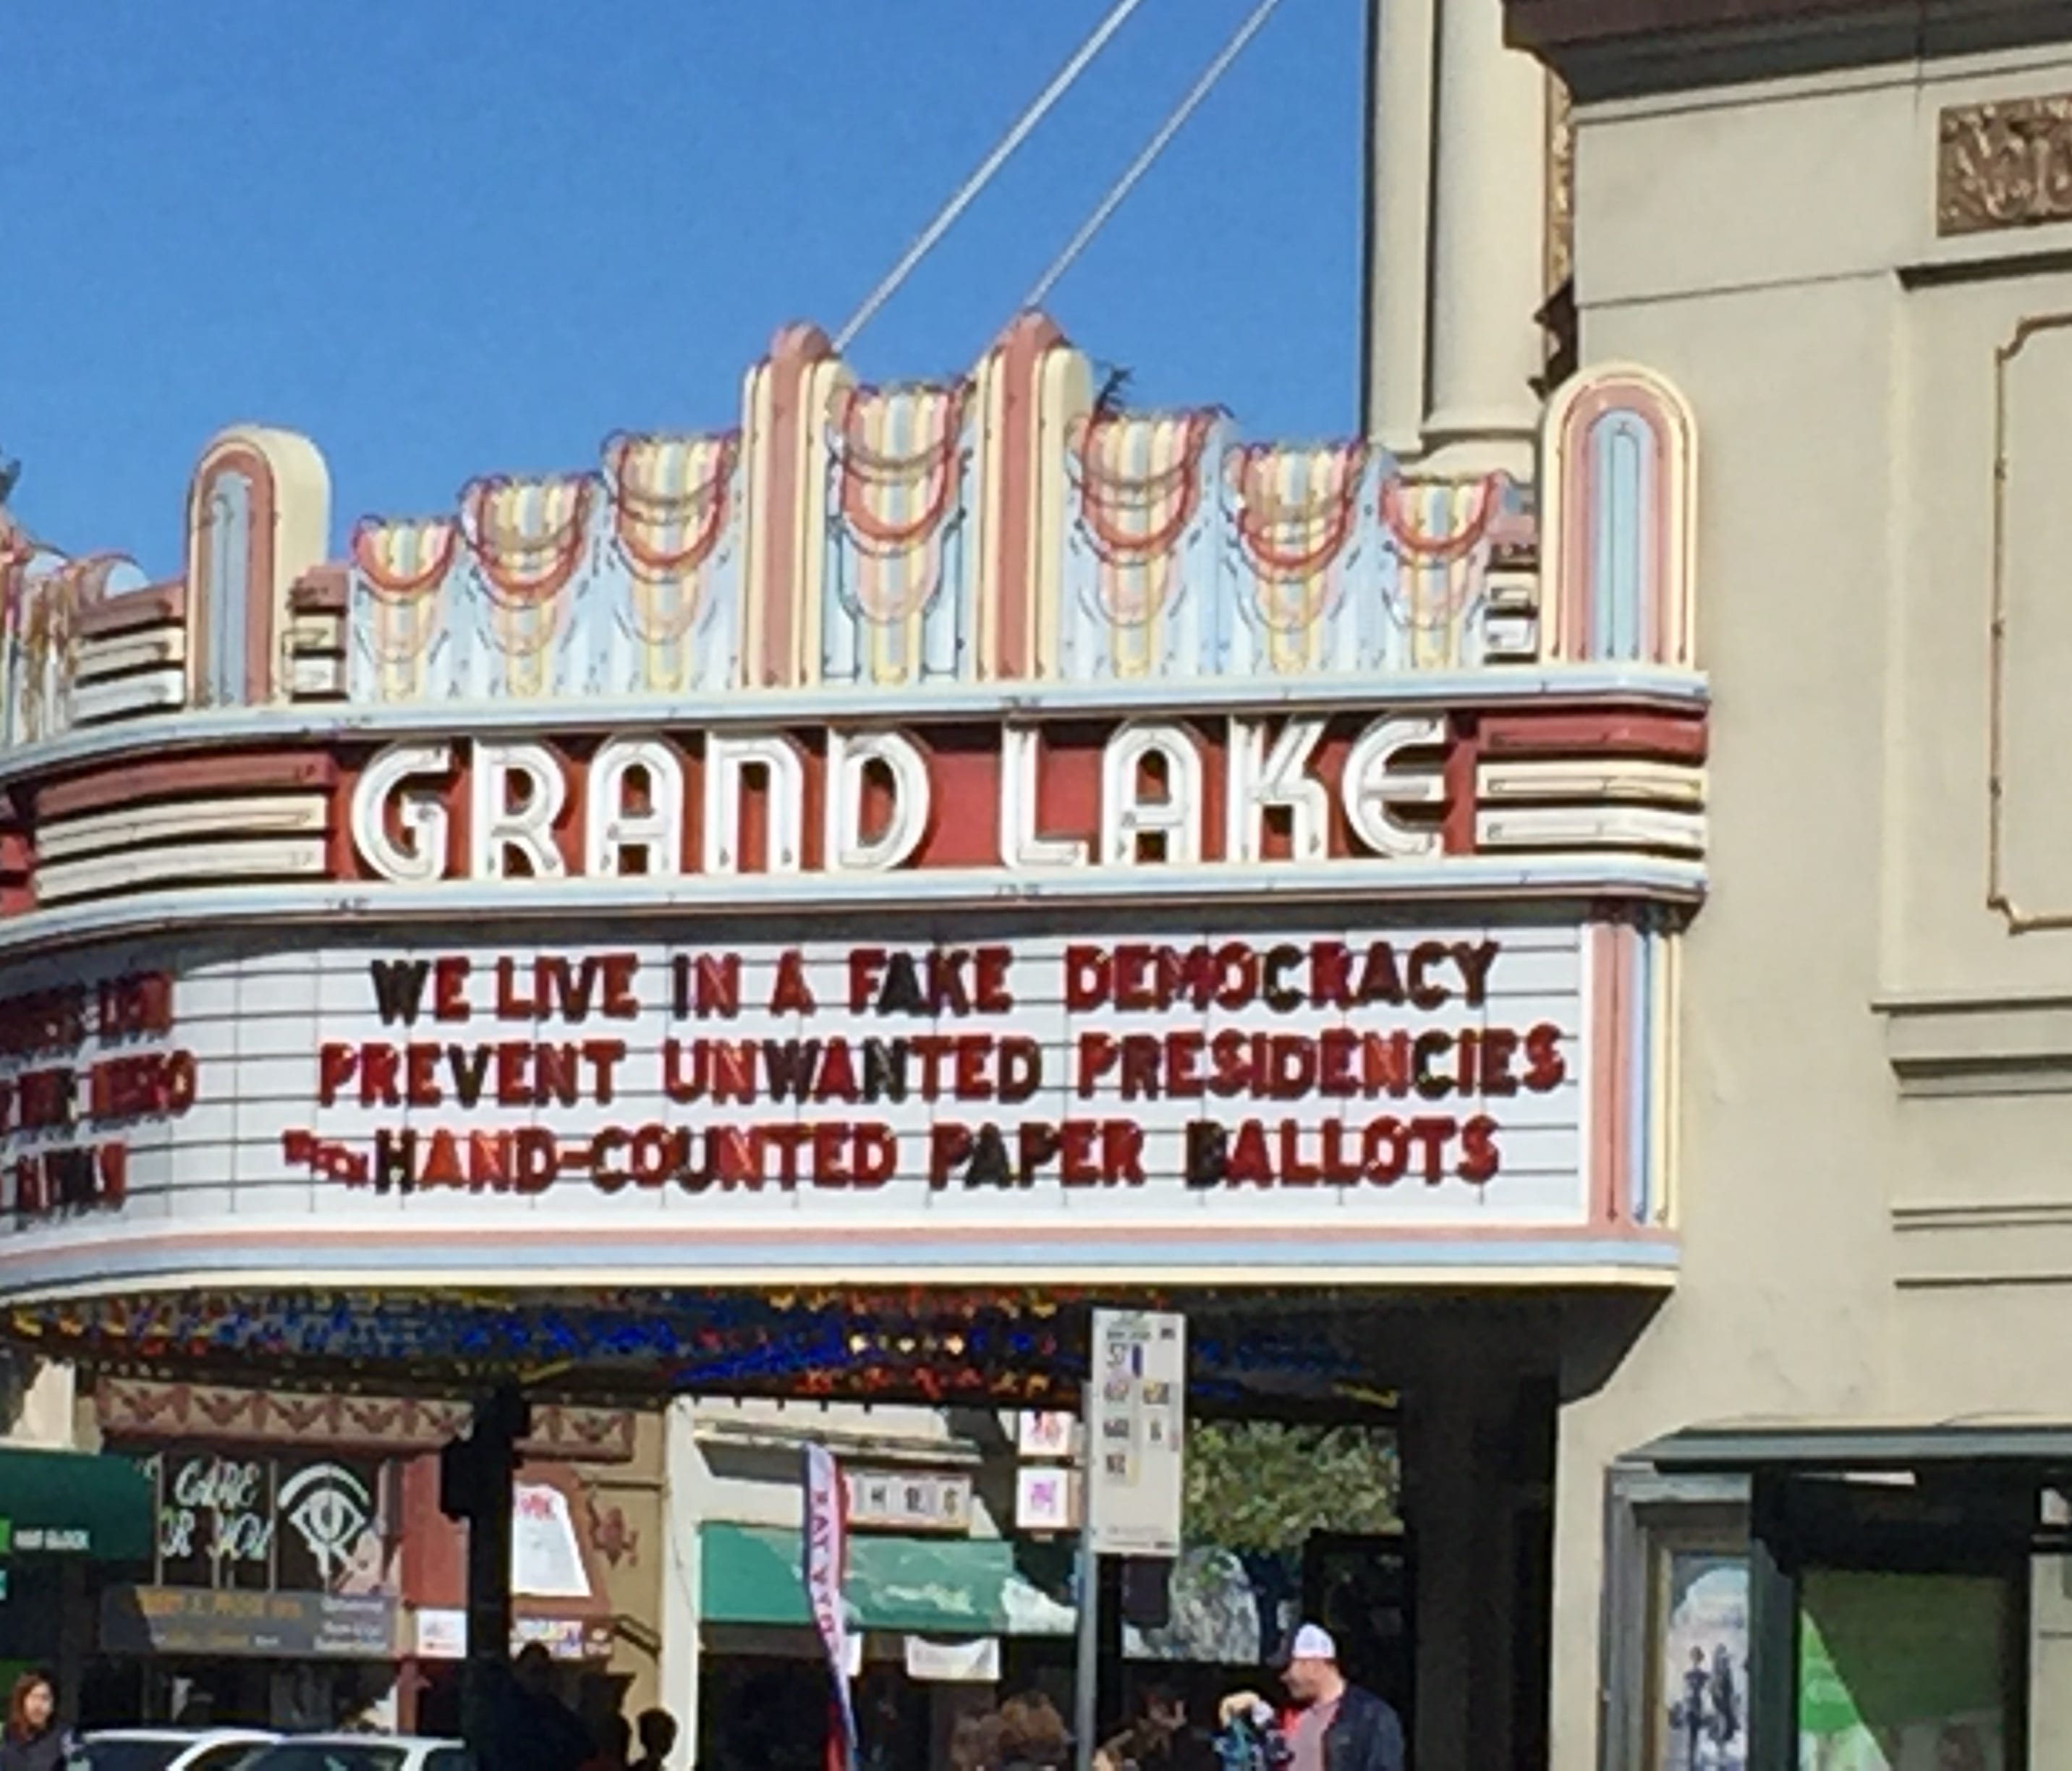 A marquee at the Grand Lake Theater in Oakland, Calif. The theater frequently posts pointed political and social commentary. This one concerned the possibility that the U.S. election might have been hacked, which election experts say can be prevented